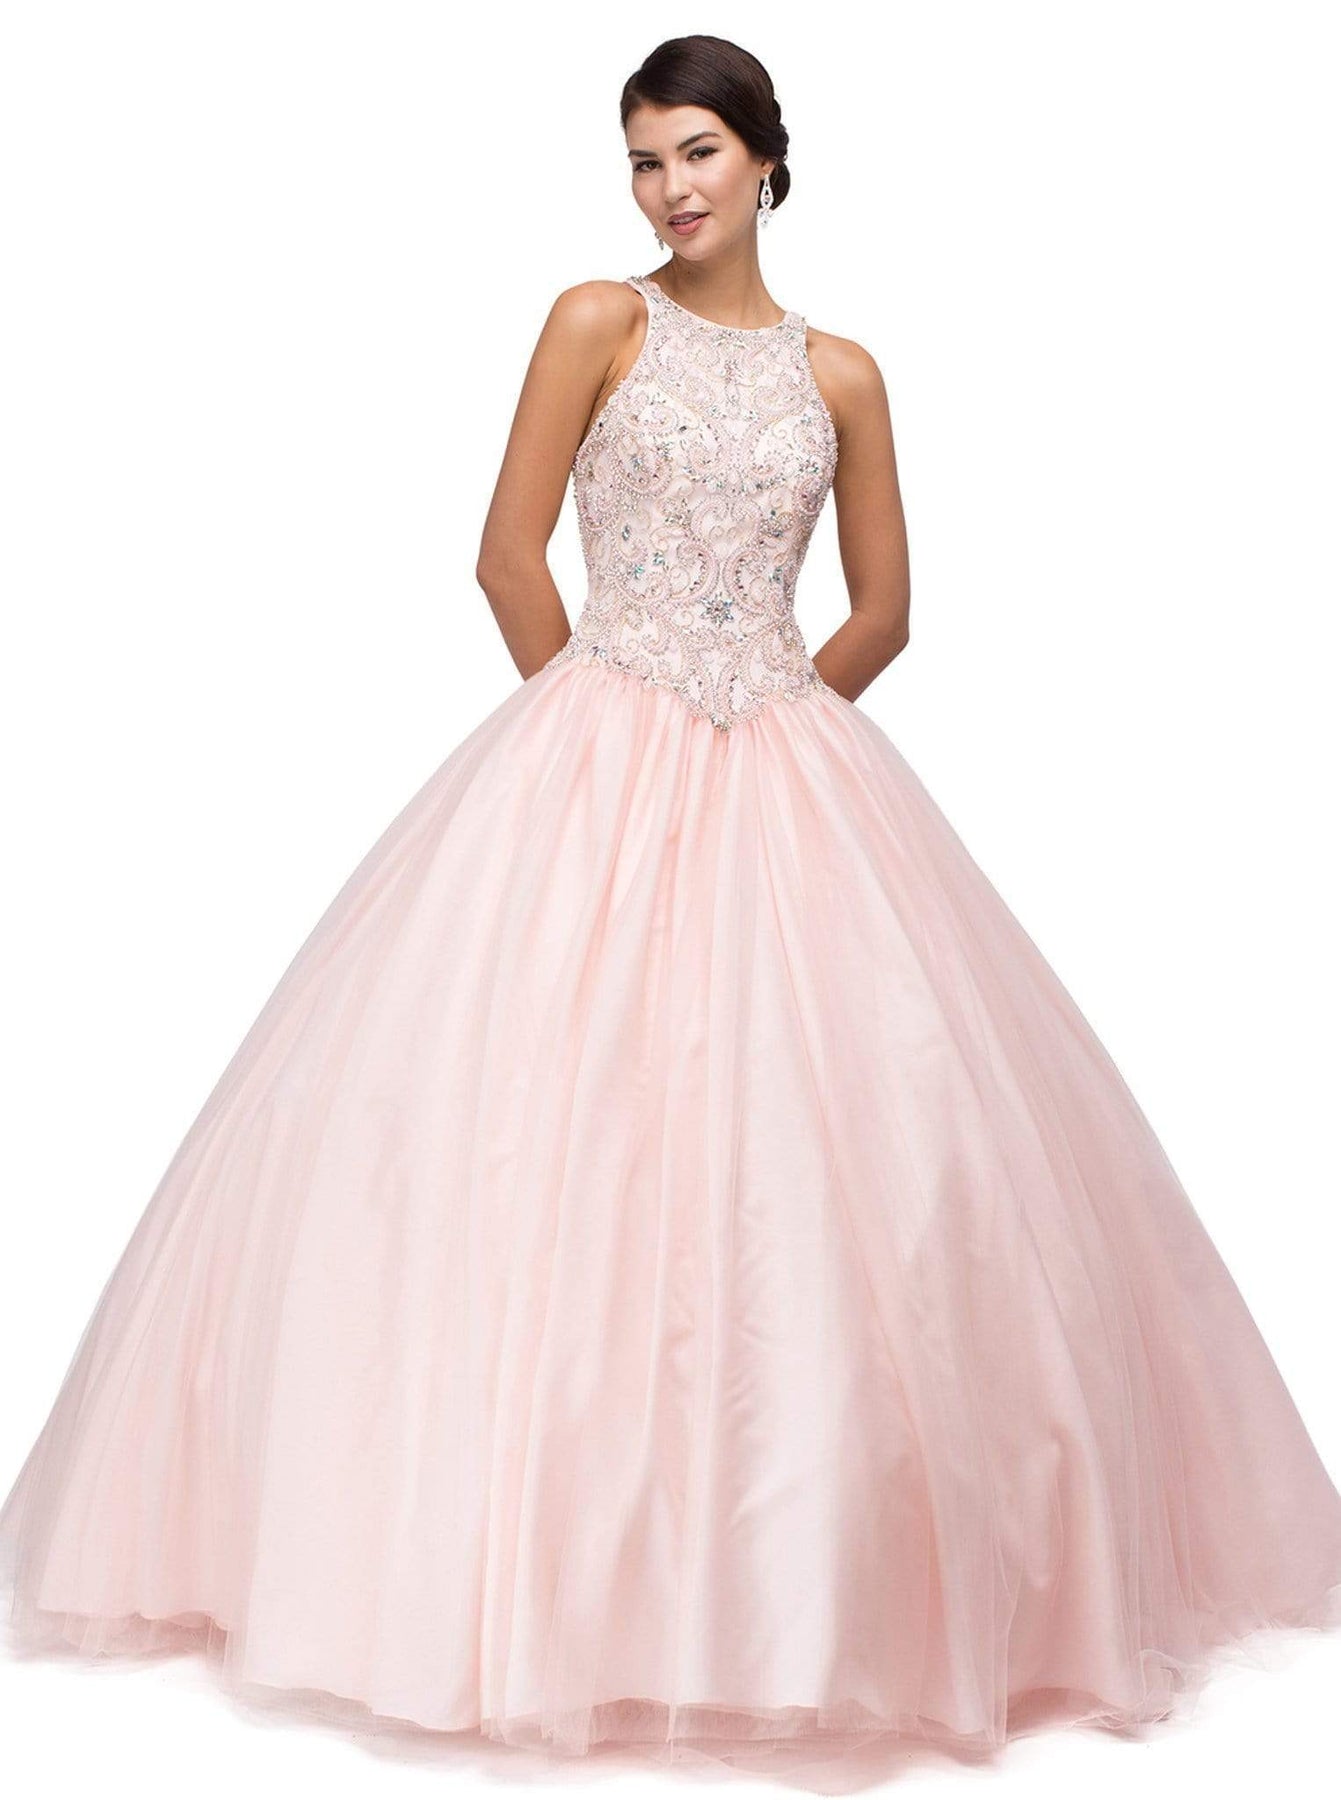 Dancing Queen - 1164 Sleeveless Jewel Embellished Quinceanera Ball Gown Special Occasion Dress XS / Blush